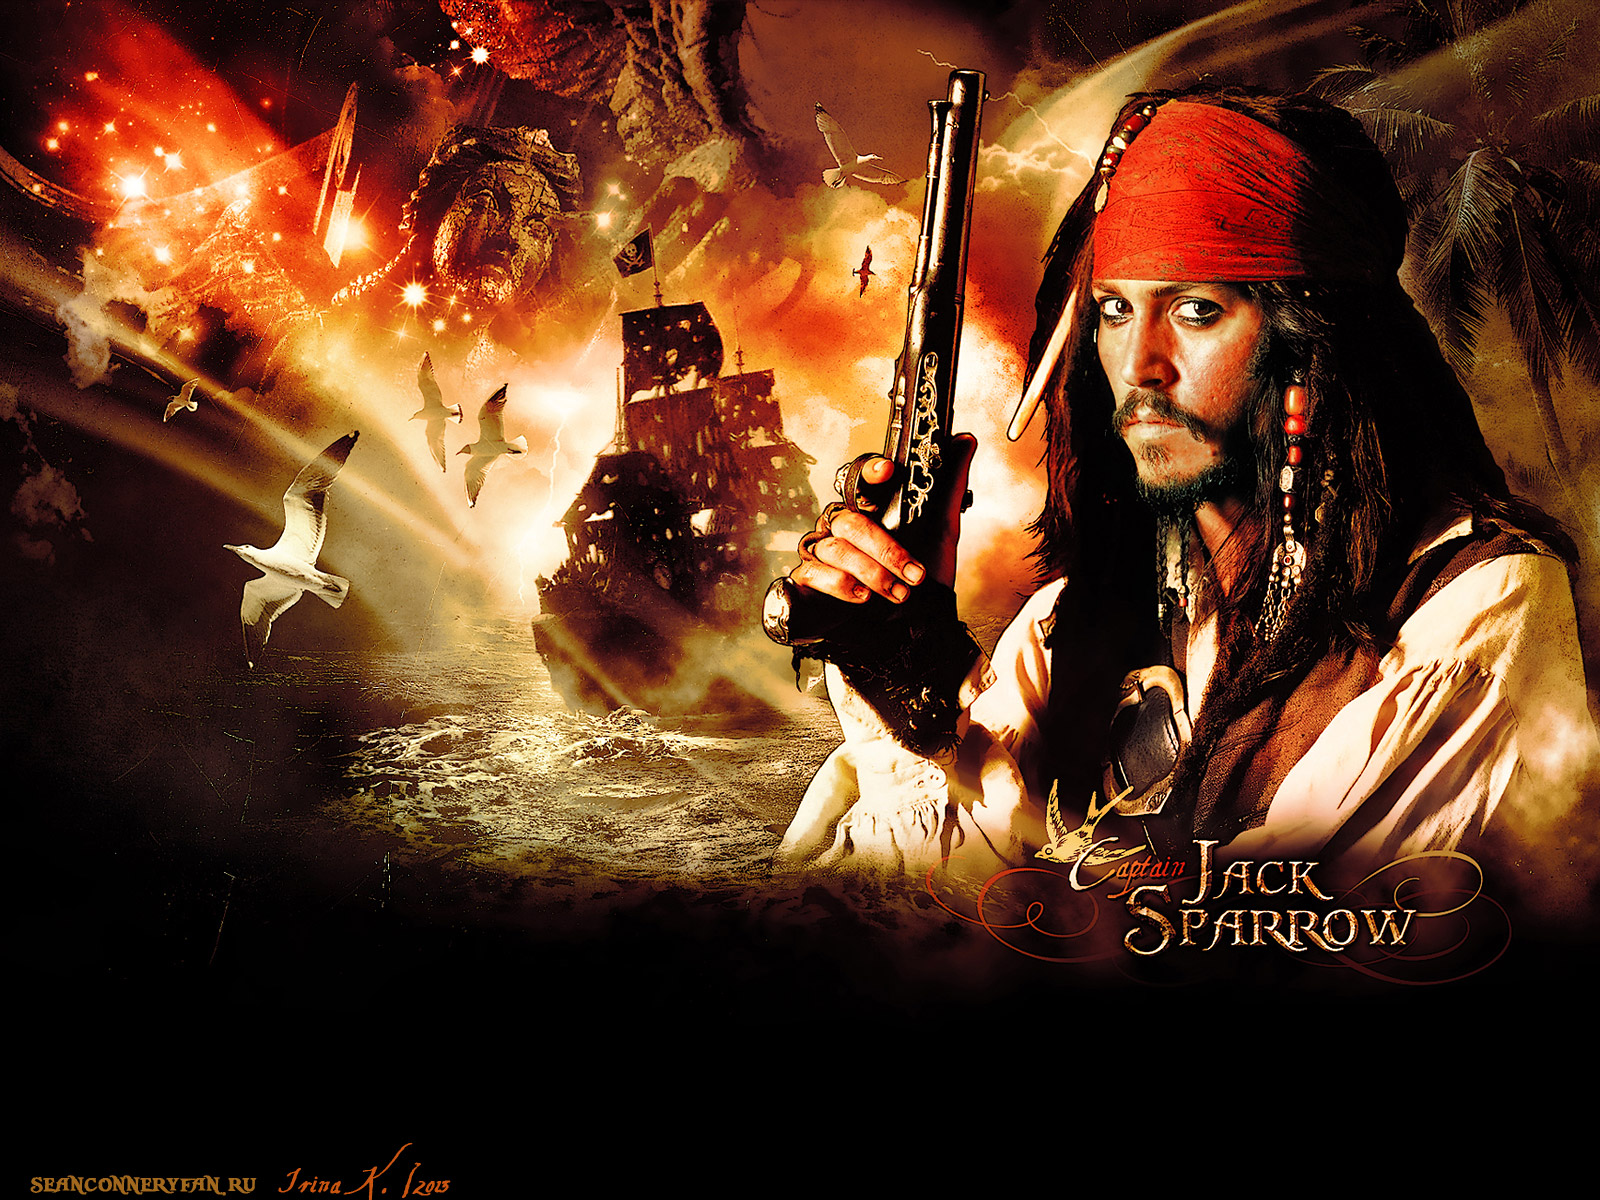   .    (Pirates of the Caribbean. The Curse of the Black Pearl),   (Johnny Depp)  Wallpaper